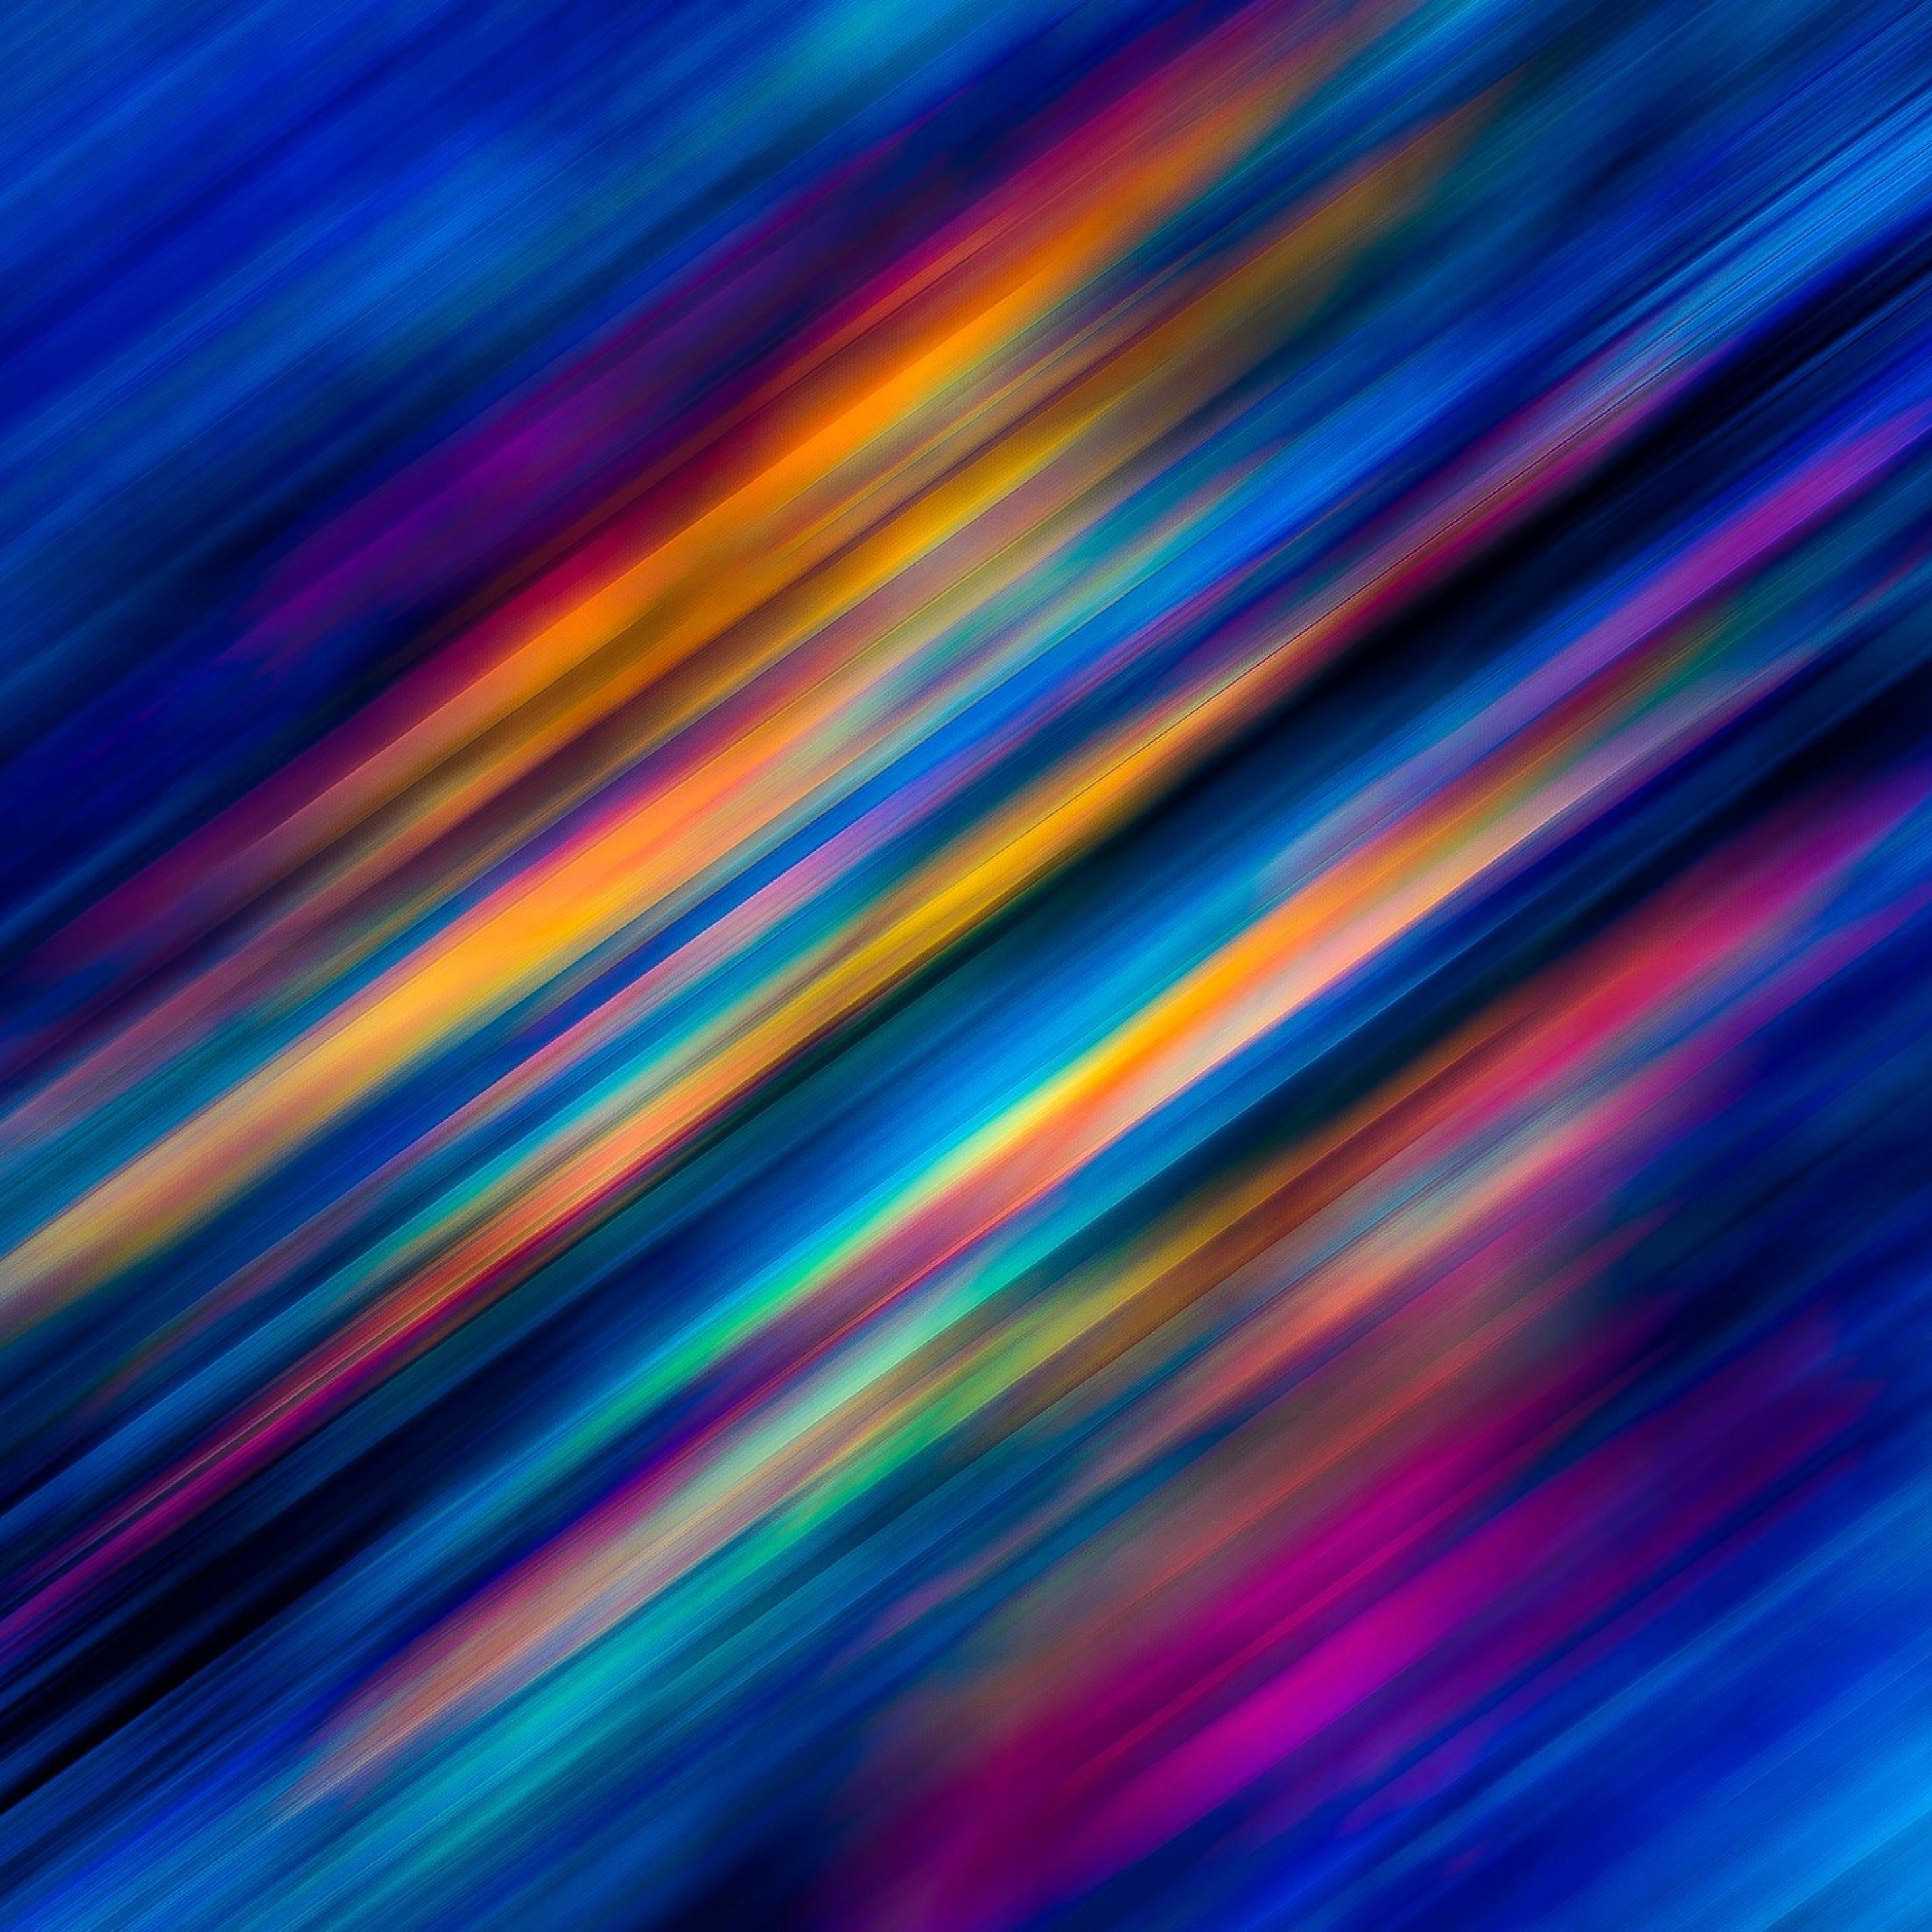 Abstract Art 2020 Wallpapers